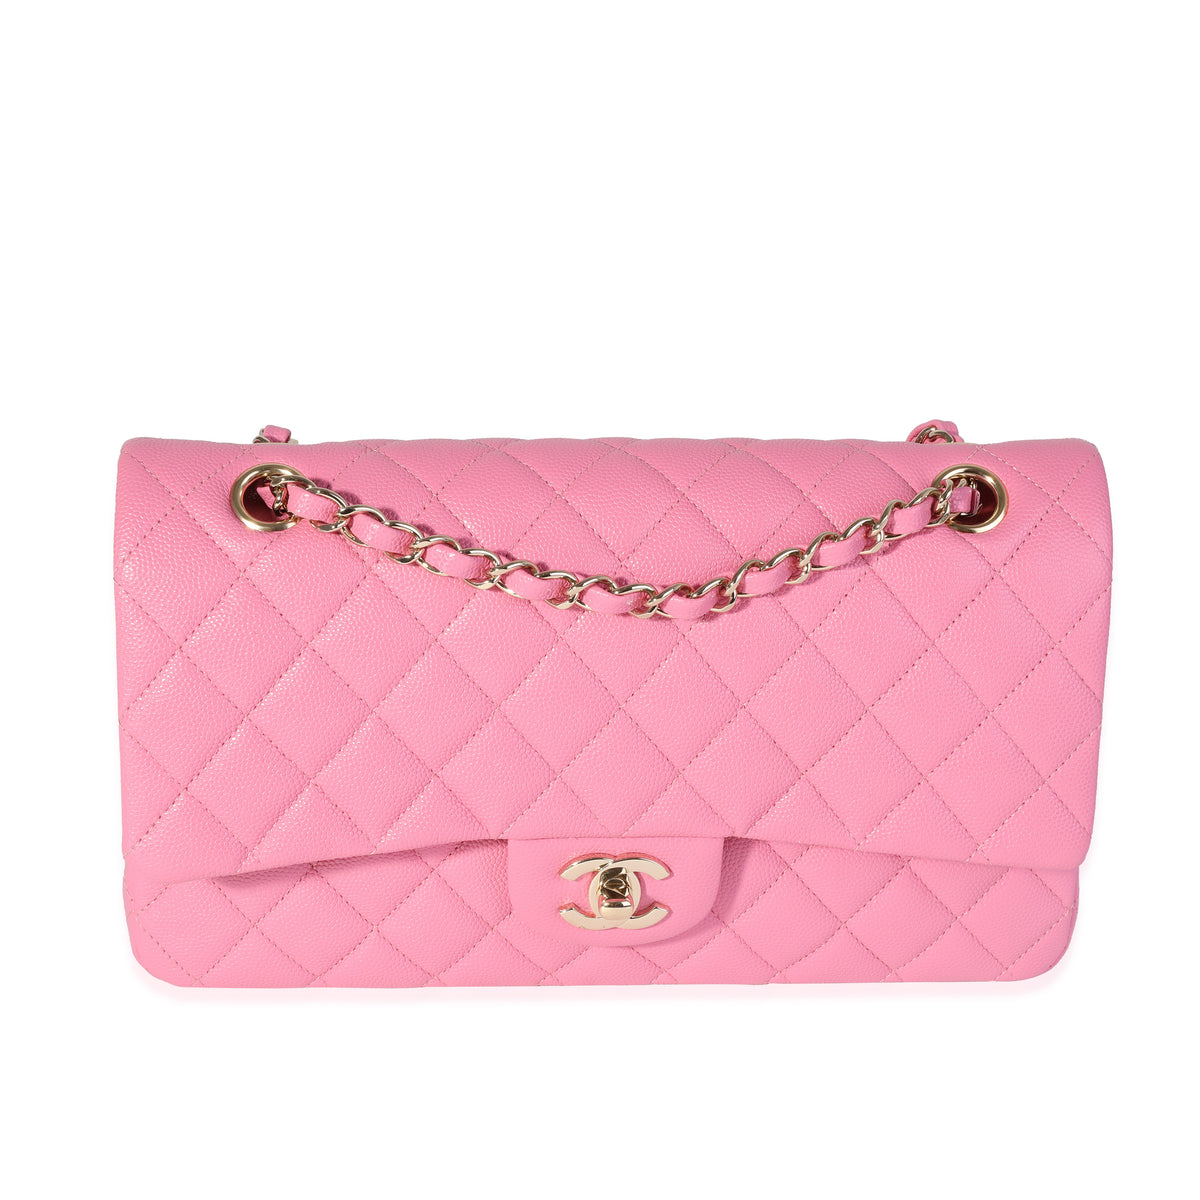 Brand New with Tag Pink Chanel Classic Double Flap Medium Bag